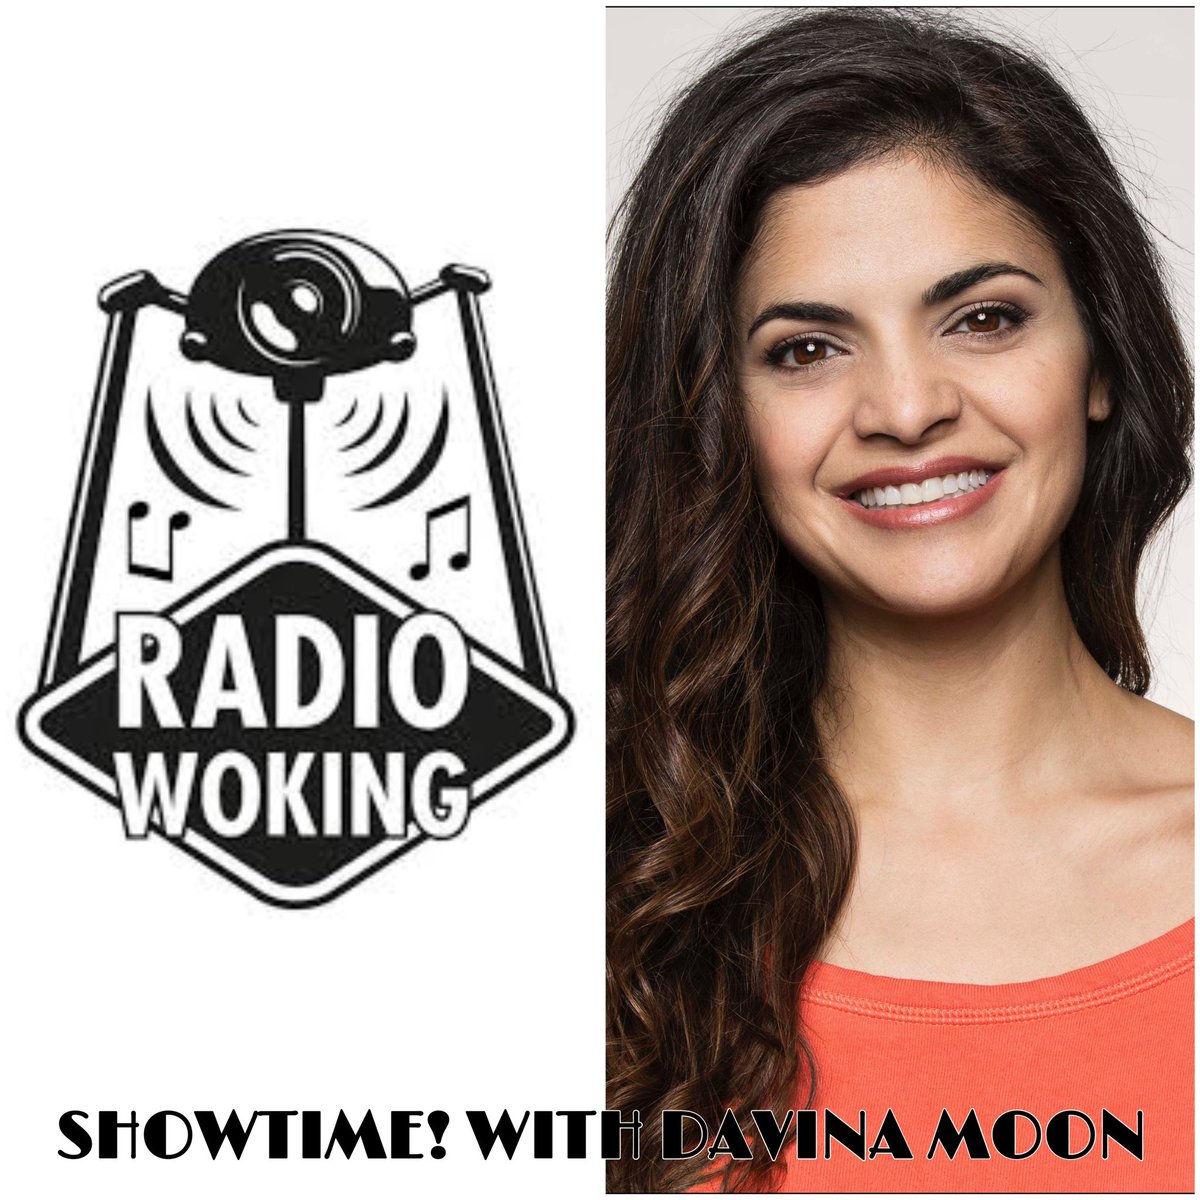 Here we go…!🎙️Today is my radio presenting debut on @RadioWoking!Showtime With Davina Moon - bringing you songs across stage, screen and soundtracks! Sundays at 4pm. Listen on DAB or radiowoking.co.uk/radioplayer/ 
#radiopresenter #musicaltheatre #localradio #radiodj